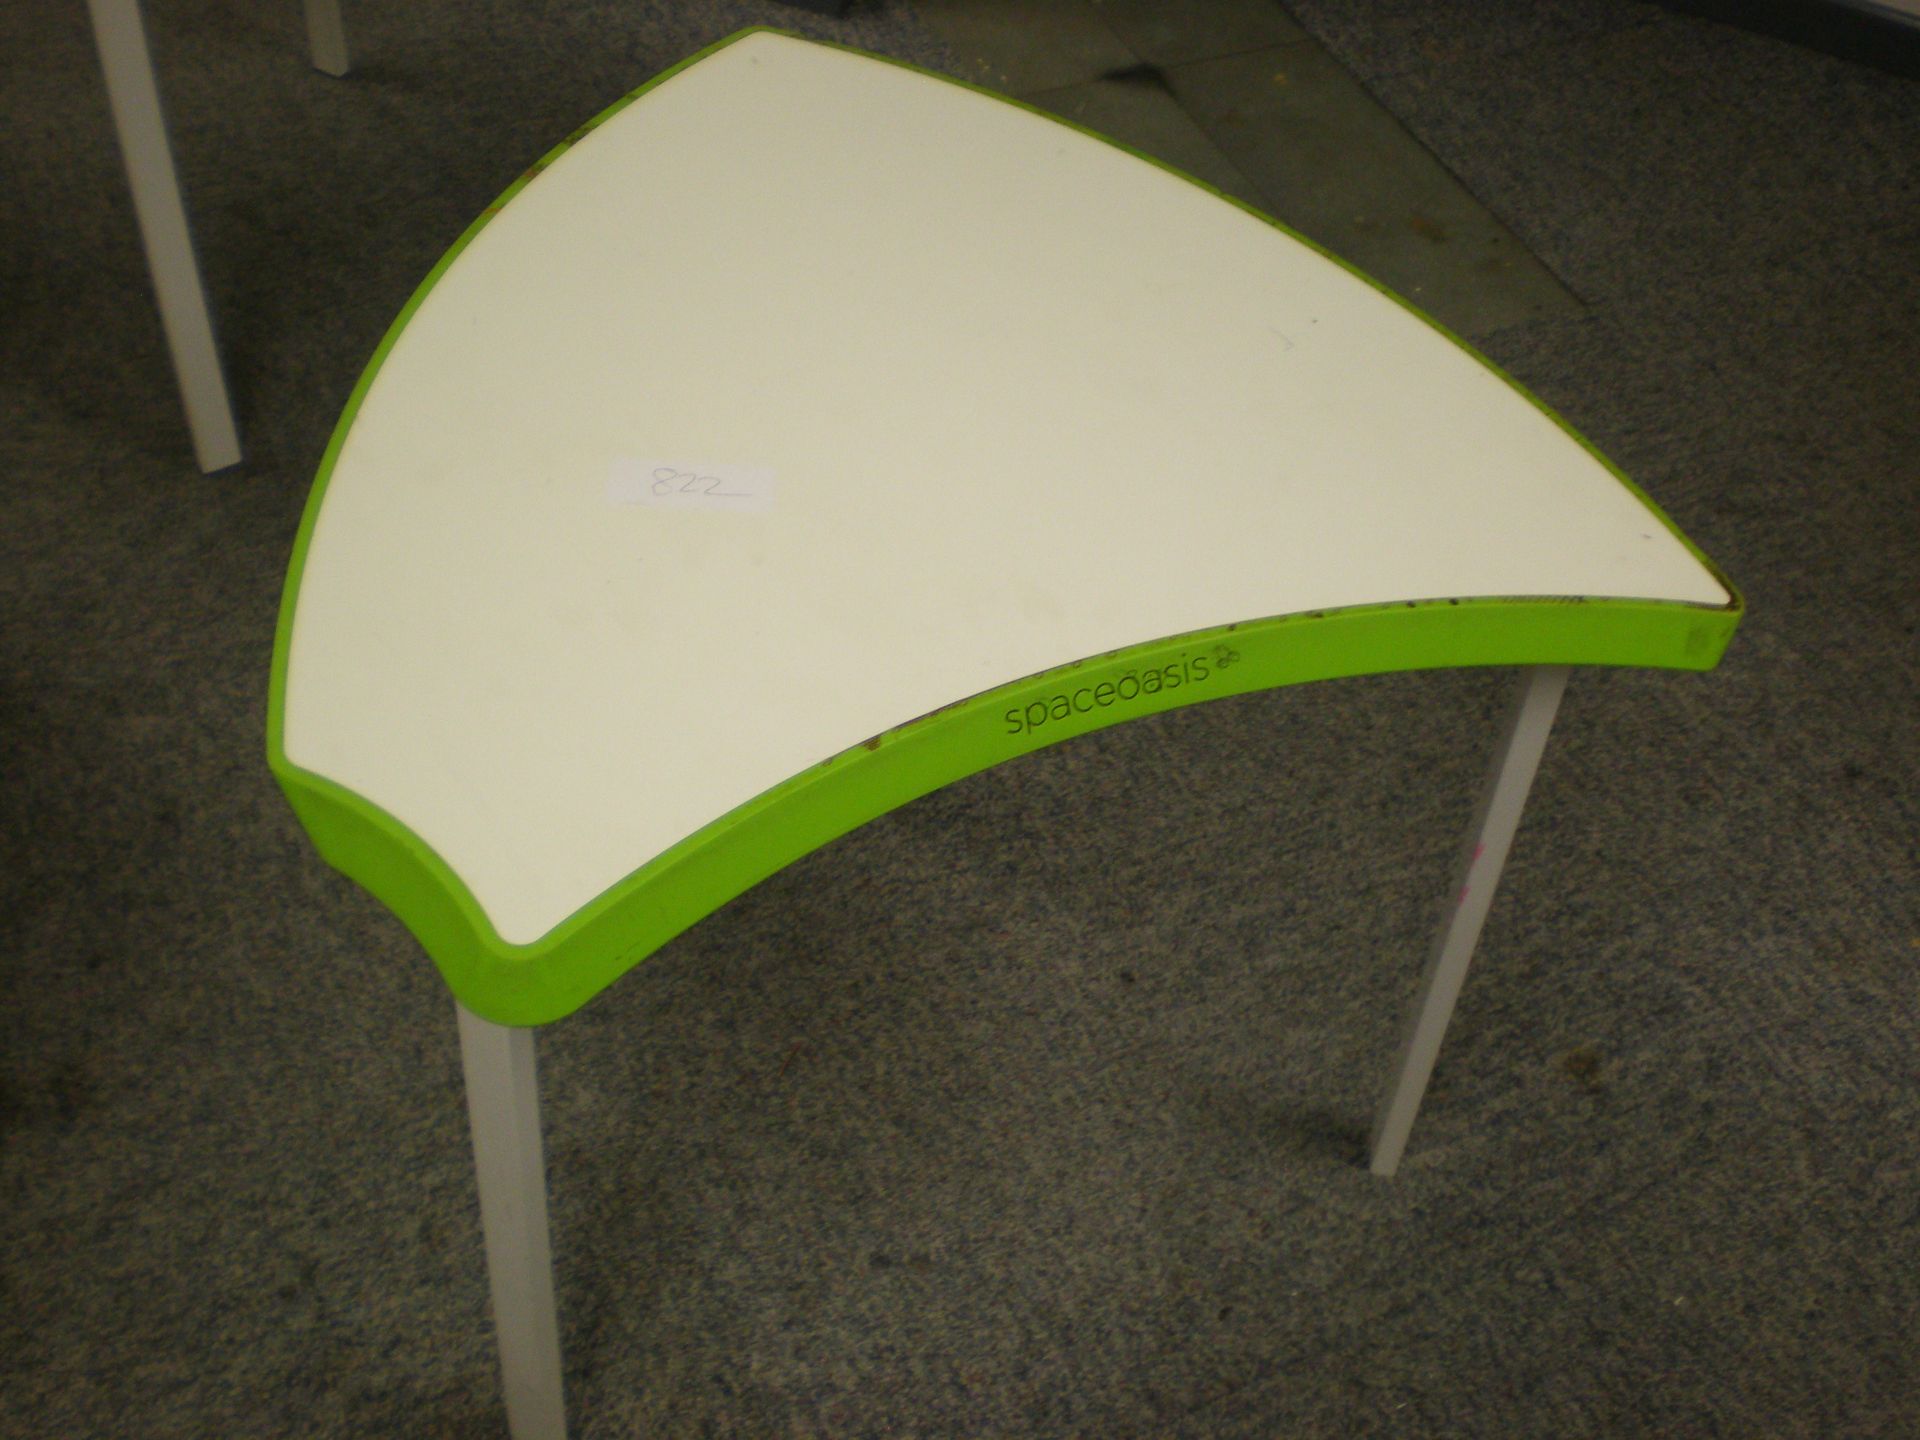 Exam Desk / Table These Can Be Arranged In Circles And Fit Together Nicely, Stackable For Easy